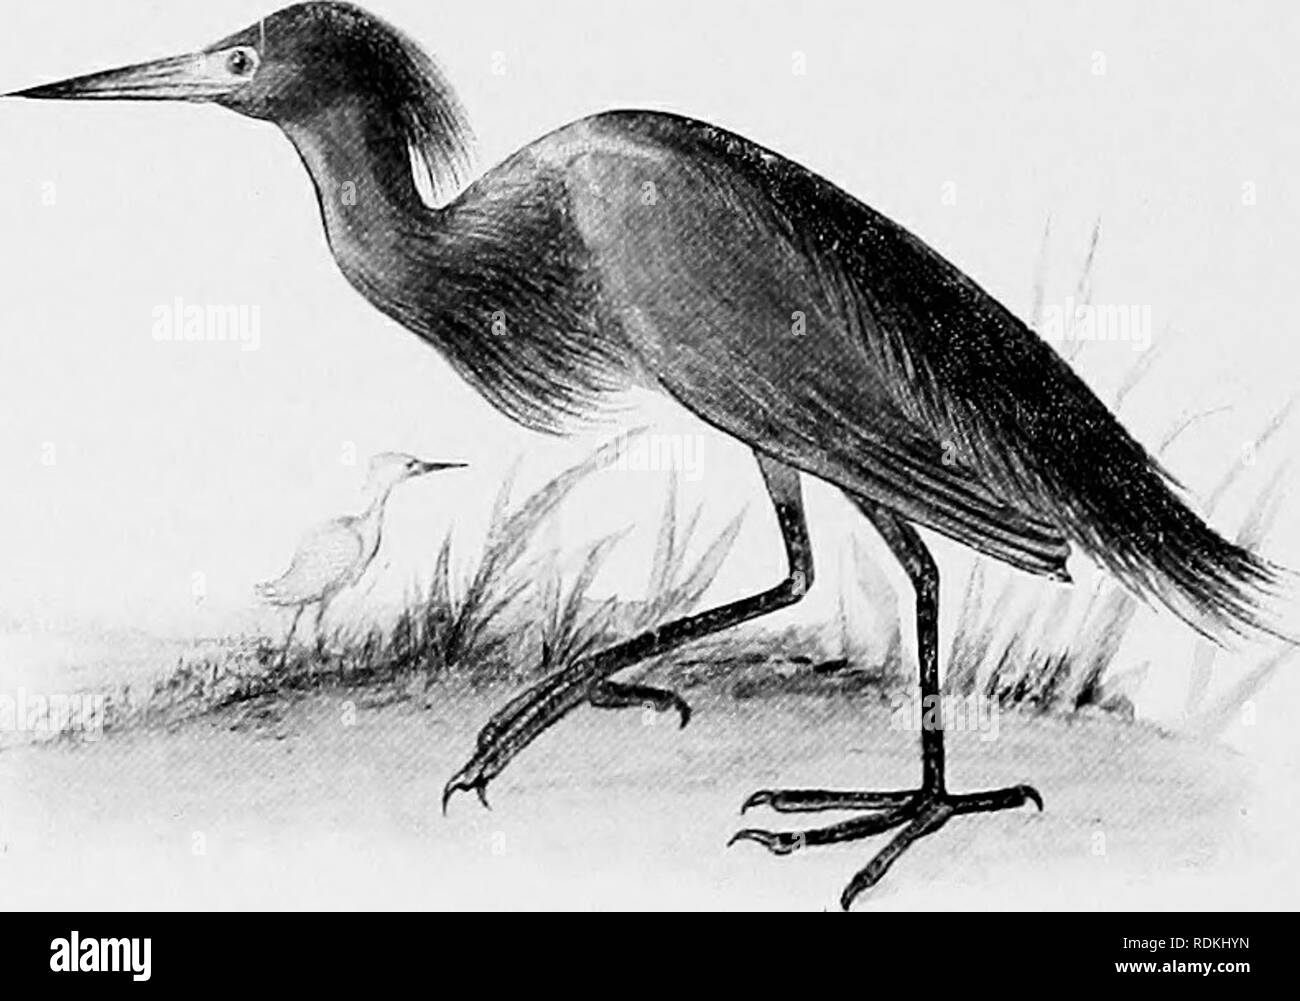 . The birds of Illinois and Wisconsin. Birds; Birds. 37o' Field Museum of Natural History — Zoology, Vol. IX. Genus FLORIDA Baird. 86. Florida caerulea (Linn.). Little Blue Heron. Ardea casrulea Linn., A. 0. U. Check List, 1895, p. 73. Bisir.: Eastern United States, from New Jersey, Illinois, and Kan- sas, southward through Mexico and Central America to northern South America, also West Indies; accidental as far north as Maine and Wisconsin. Adult: Head and neck, purplish red or maroon, rest of plumage, grayish blue; bill, black at the end; basal portion and loral space, blue; legs and feet, b Stock Photo